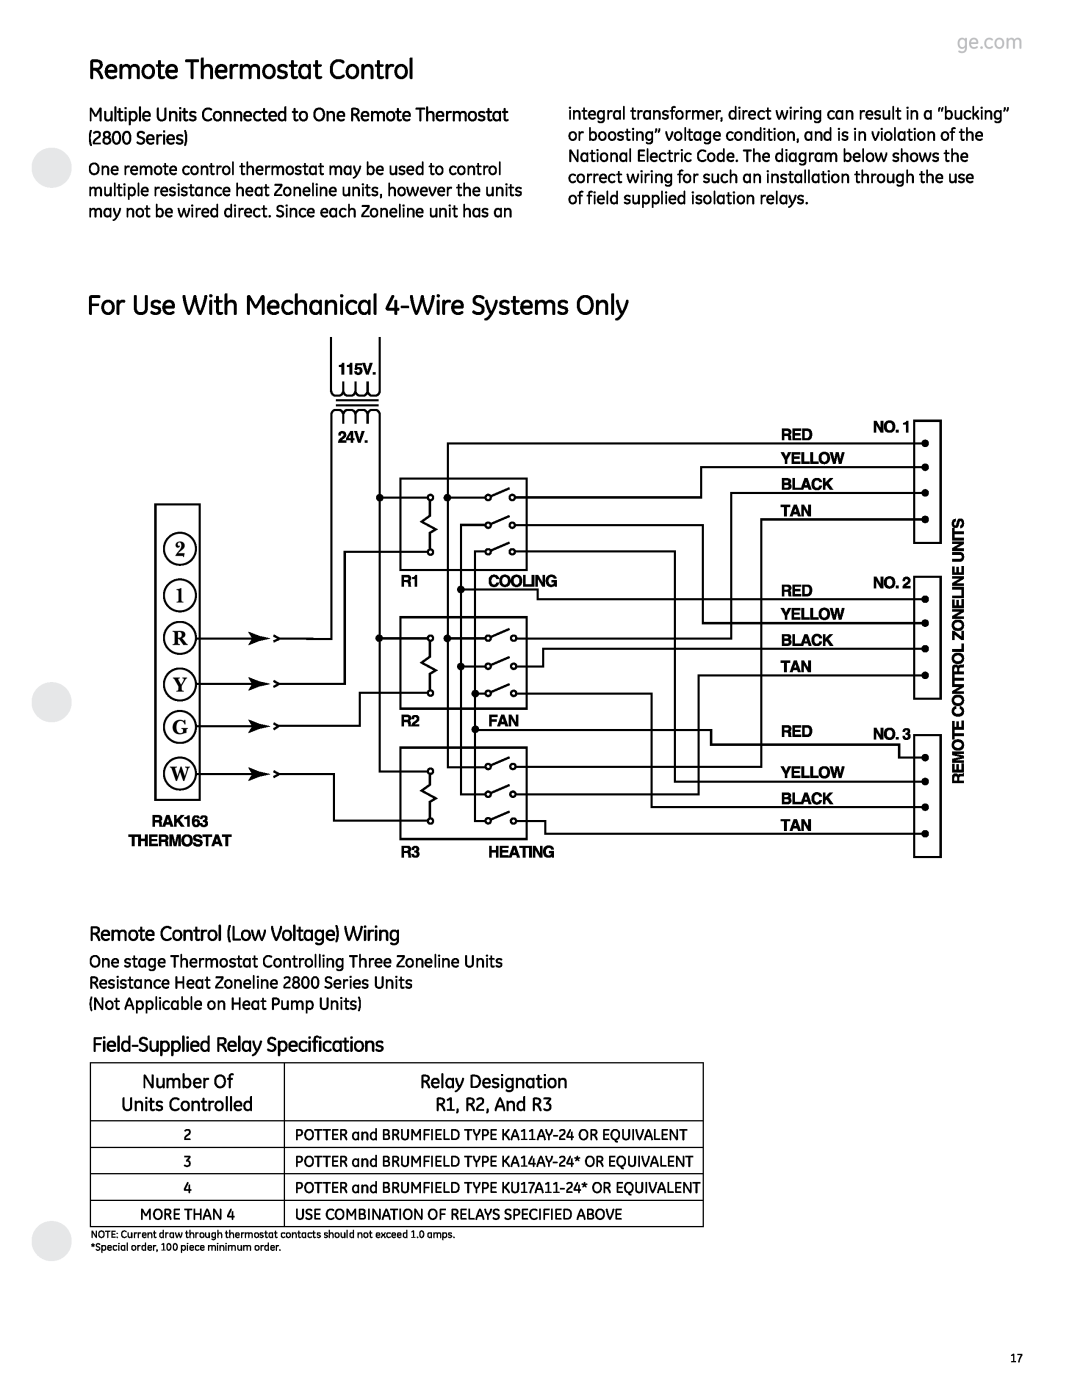 GE 2800 For Use With Mechanical 4-WireSystems Only, Remote Control Low Voltage Wiring, Field-SuppliedRelay Specifications 